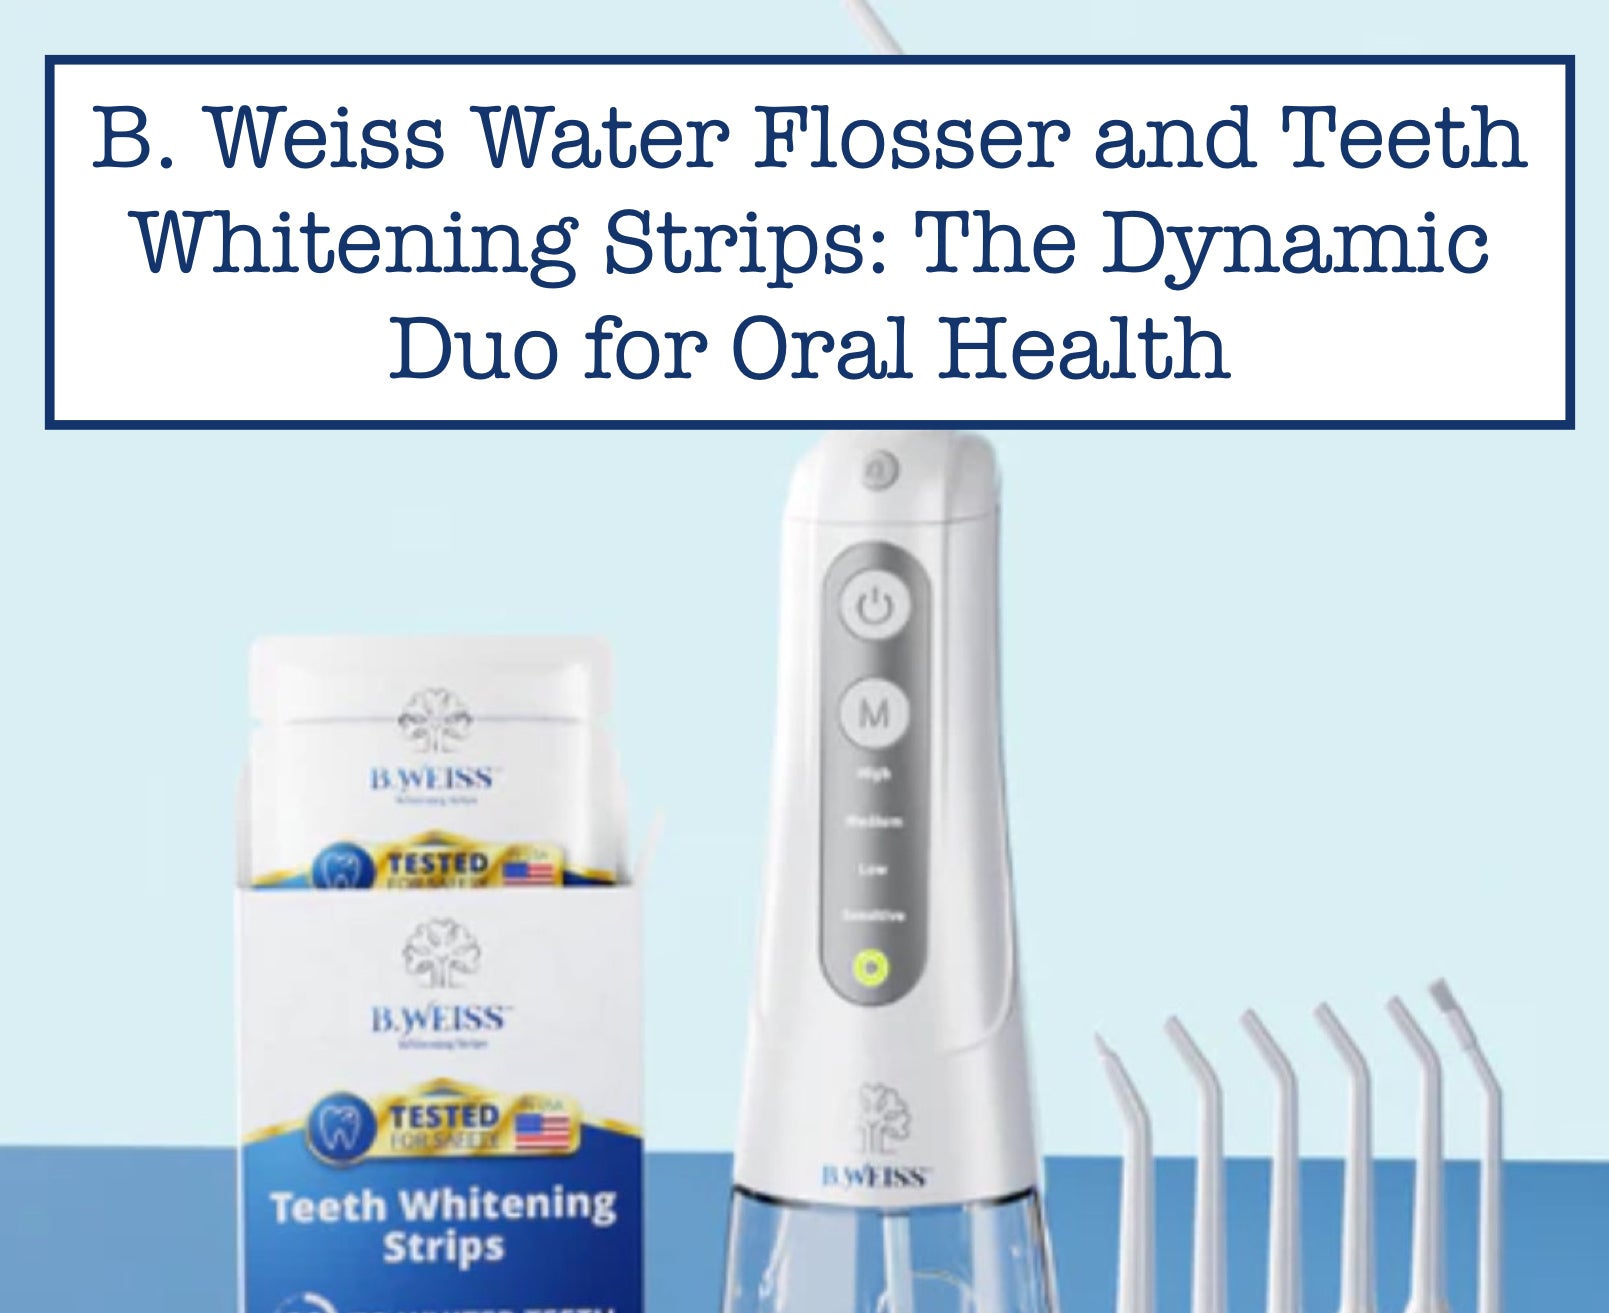 B. Weiss Water Flosser and Teeth Whitening Strips: The Dynamic Duo for Oral Health